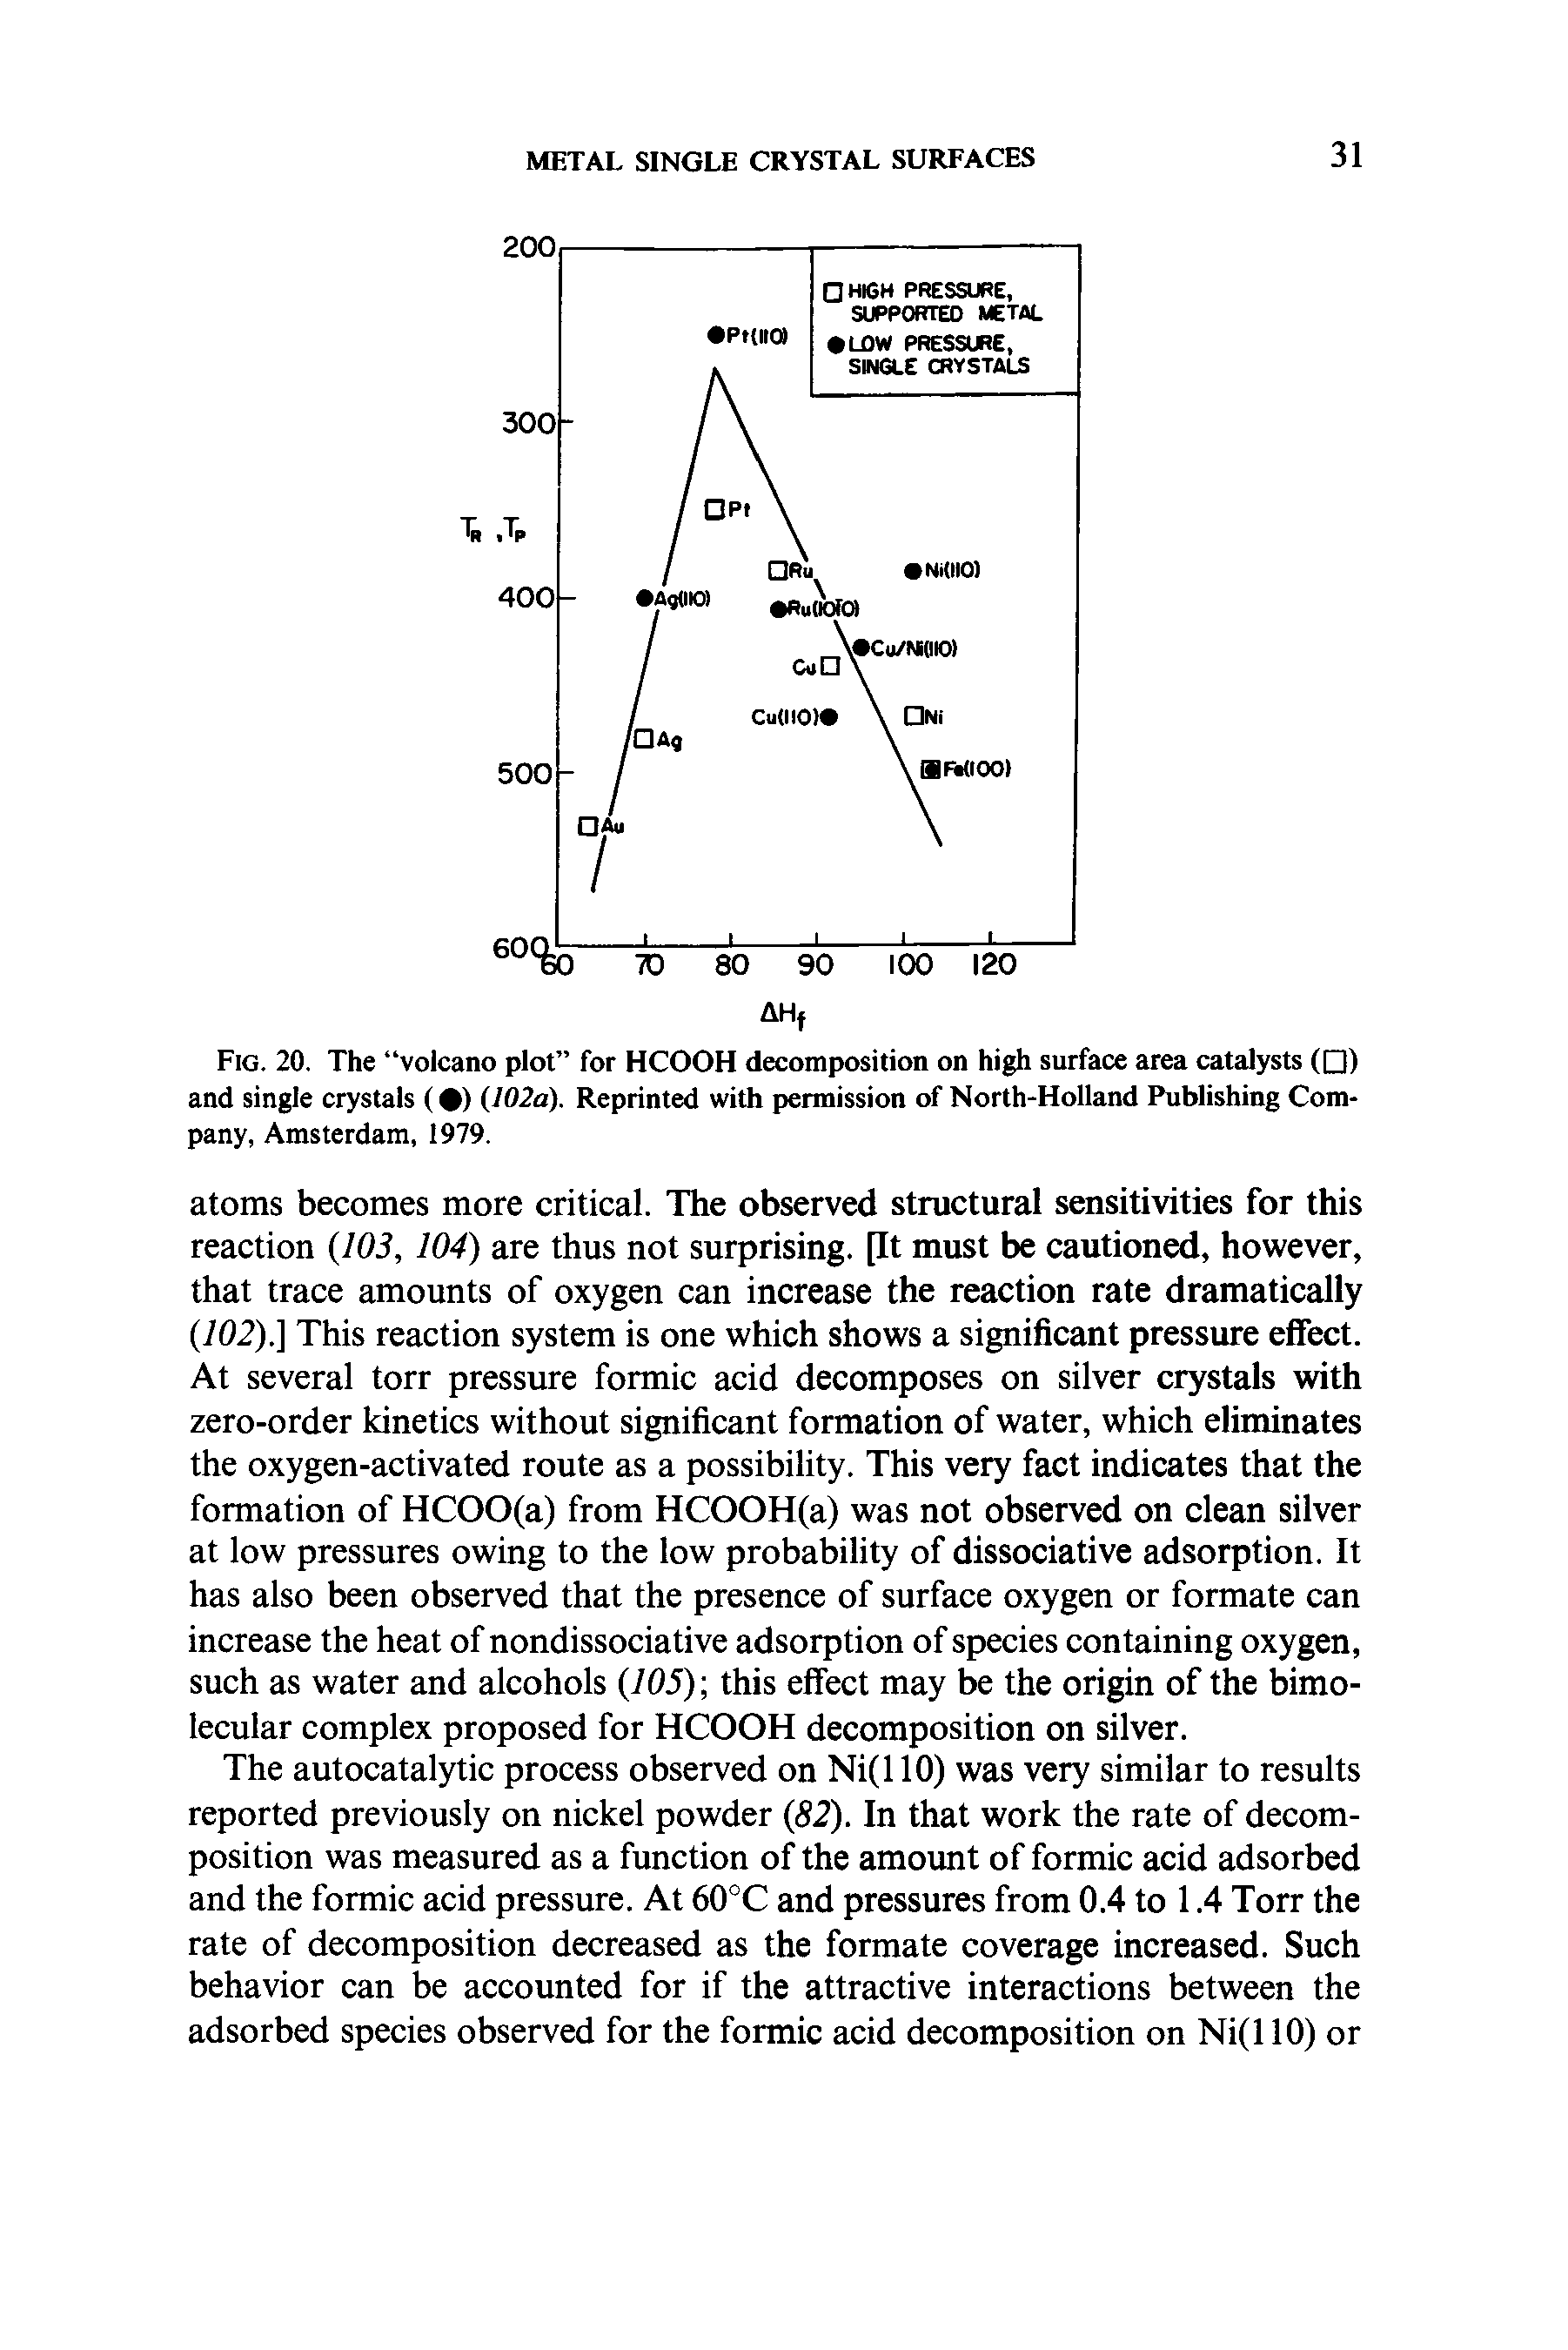 Fig. 20. The volcano plot for HCOOH decomposition on high surface area catalysts ( ) and single crystals ( ) (102a). Reprinted with permission of North-Holland Publishing Company, Amsterdam, 1979.